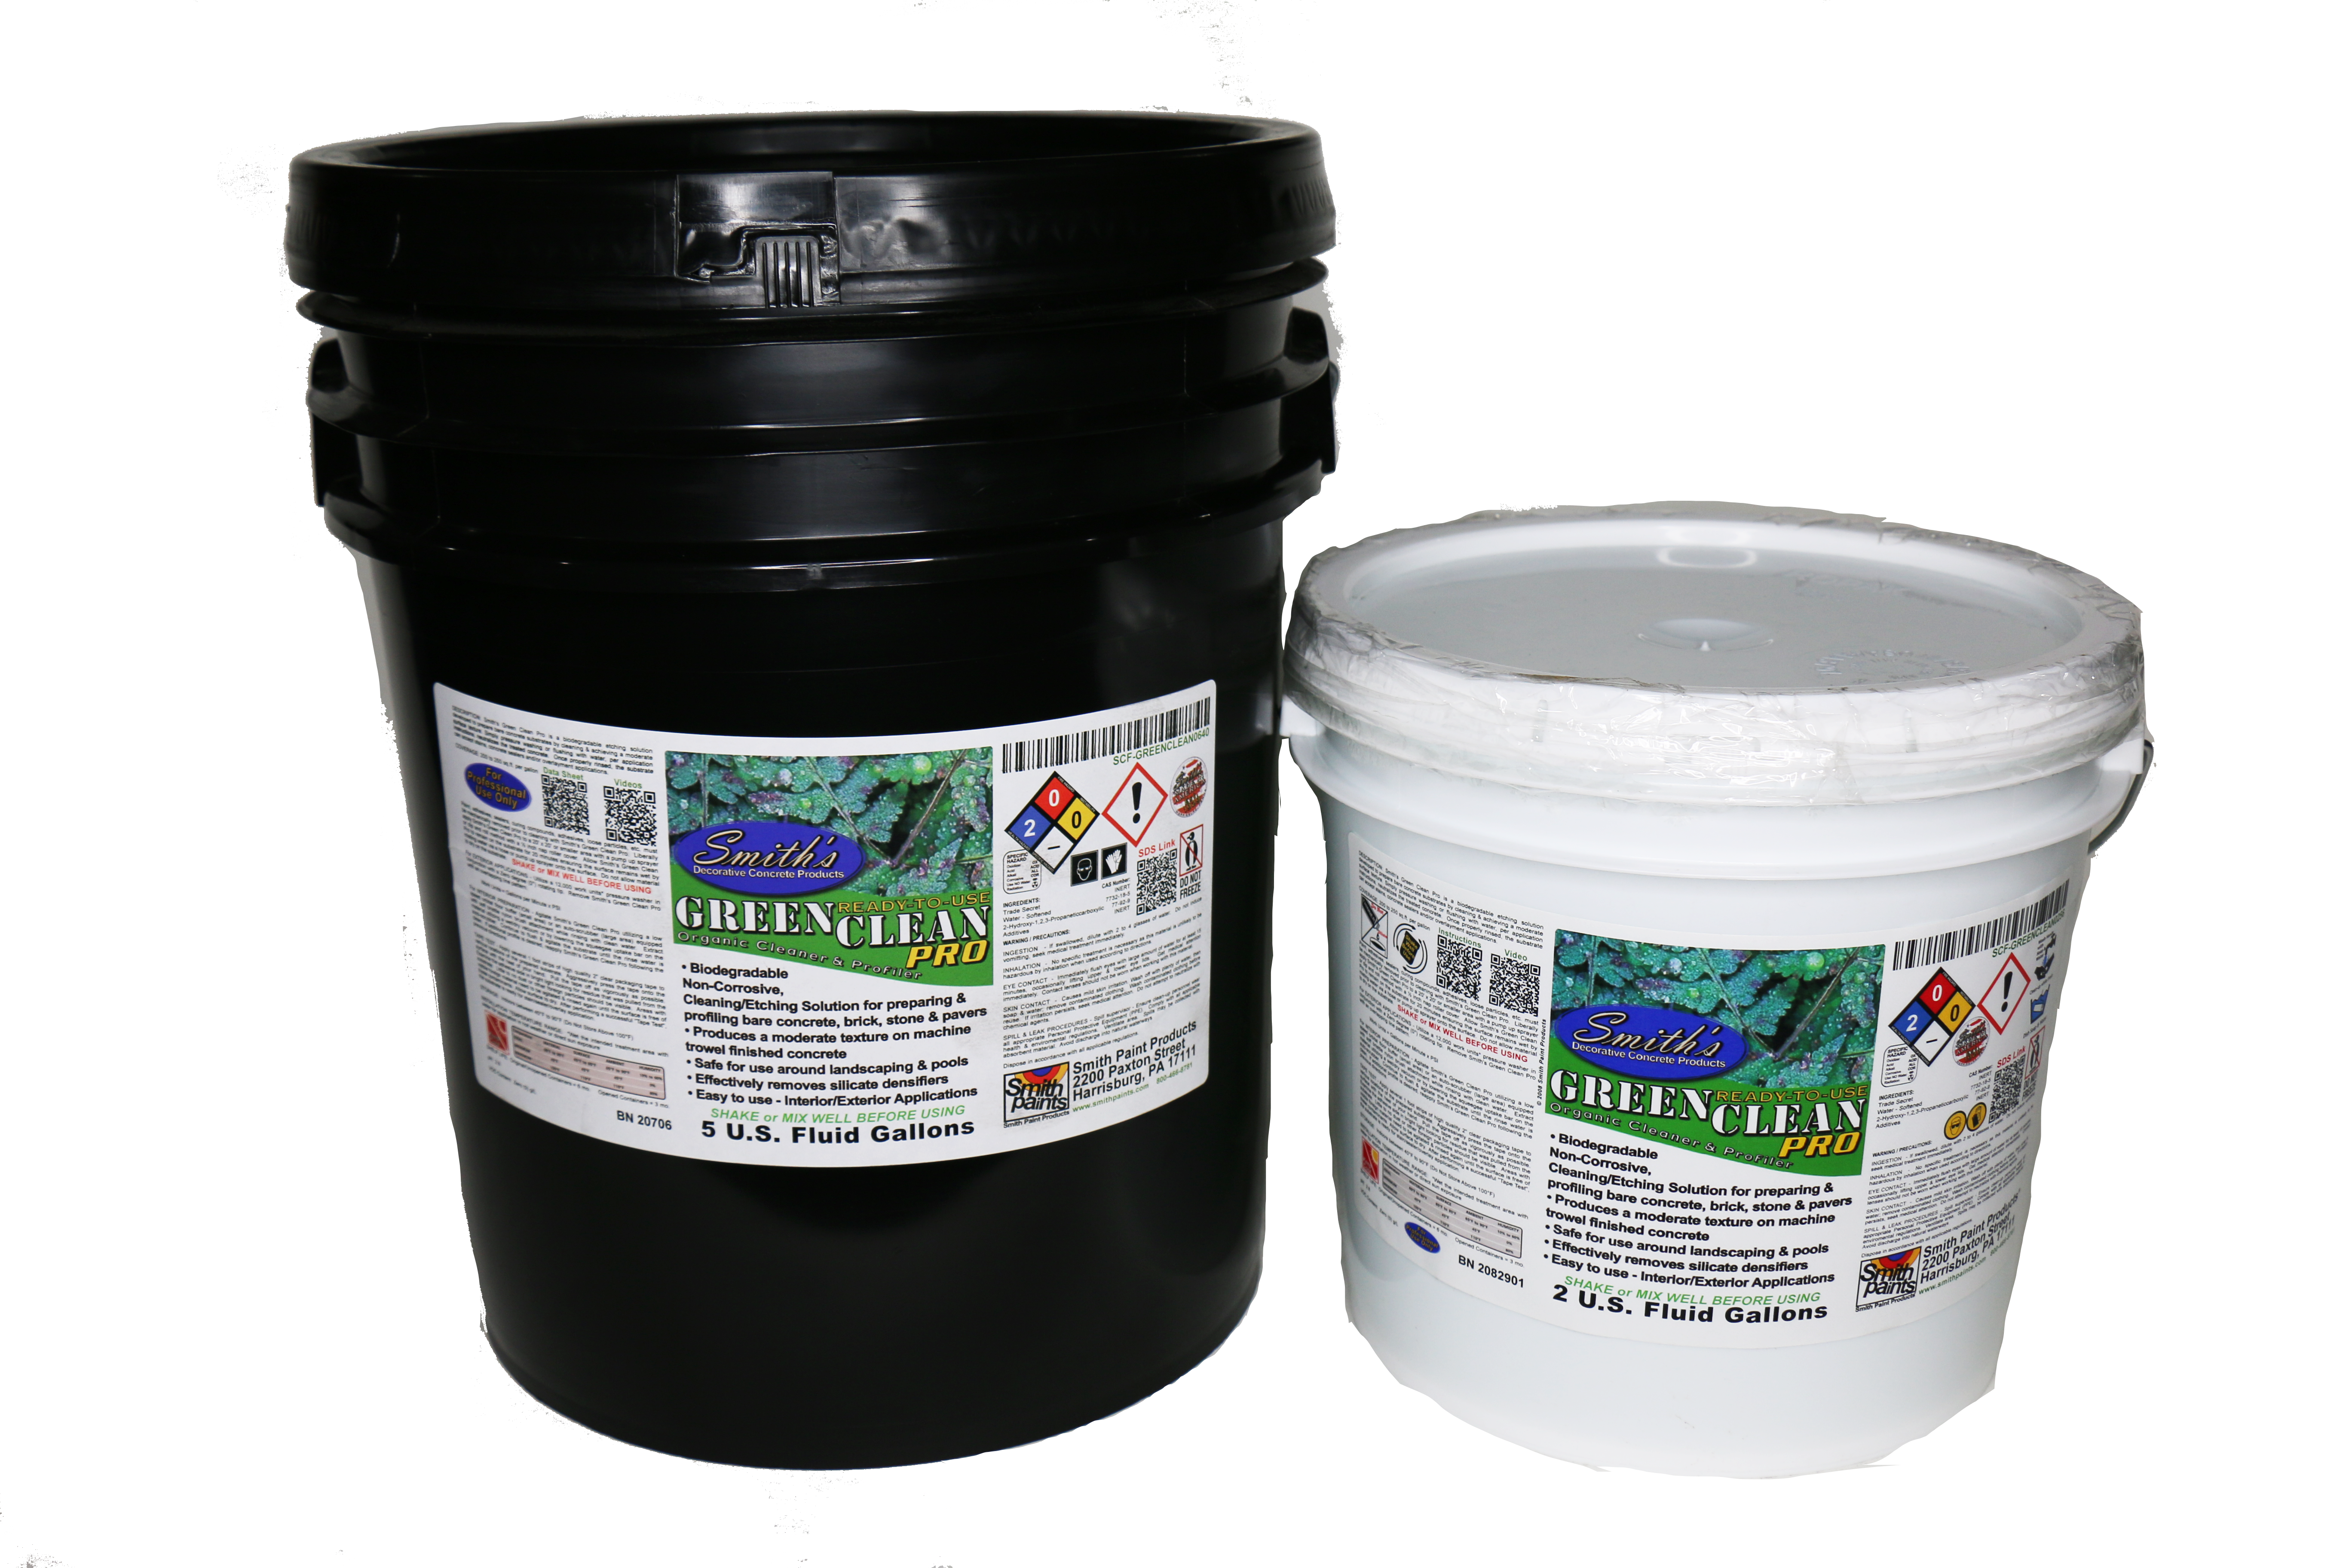  - Construction Powders & Chemicals